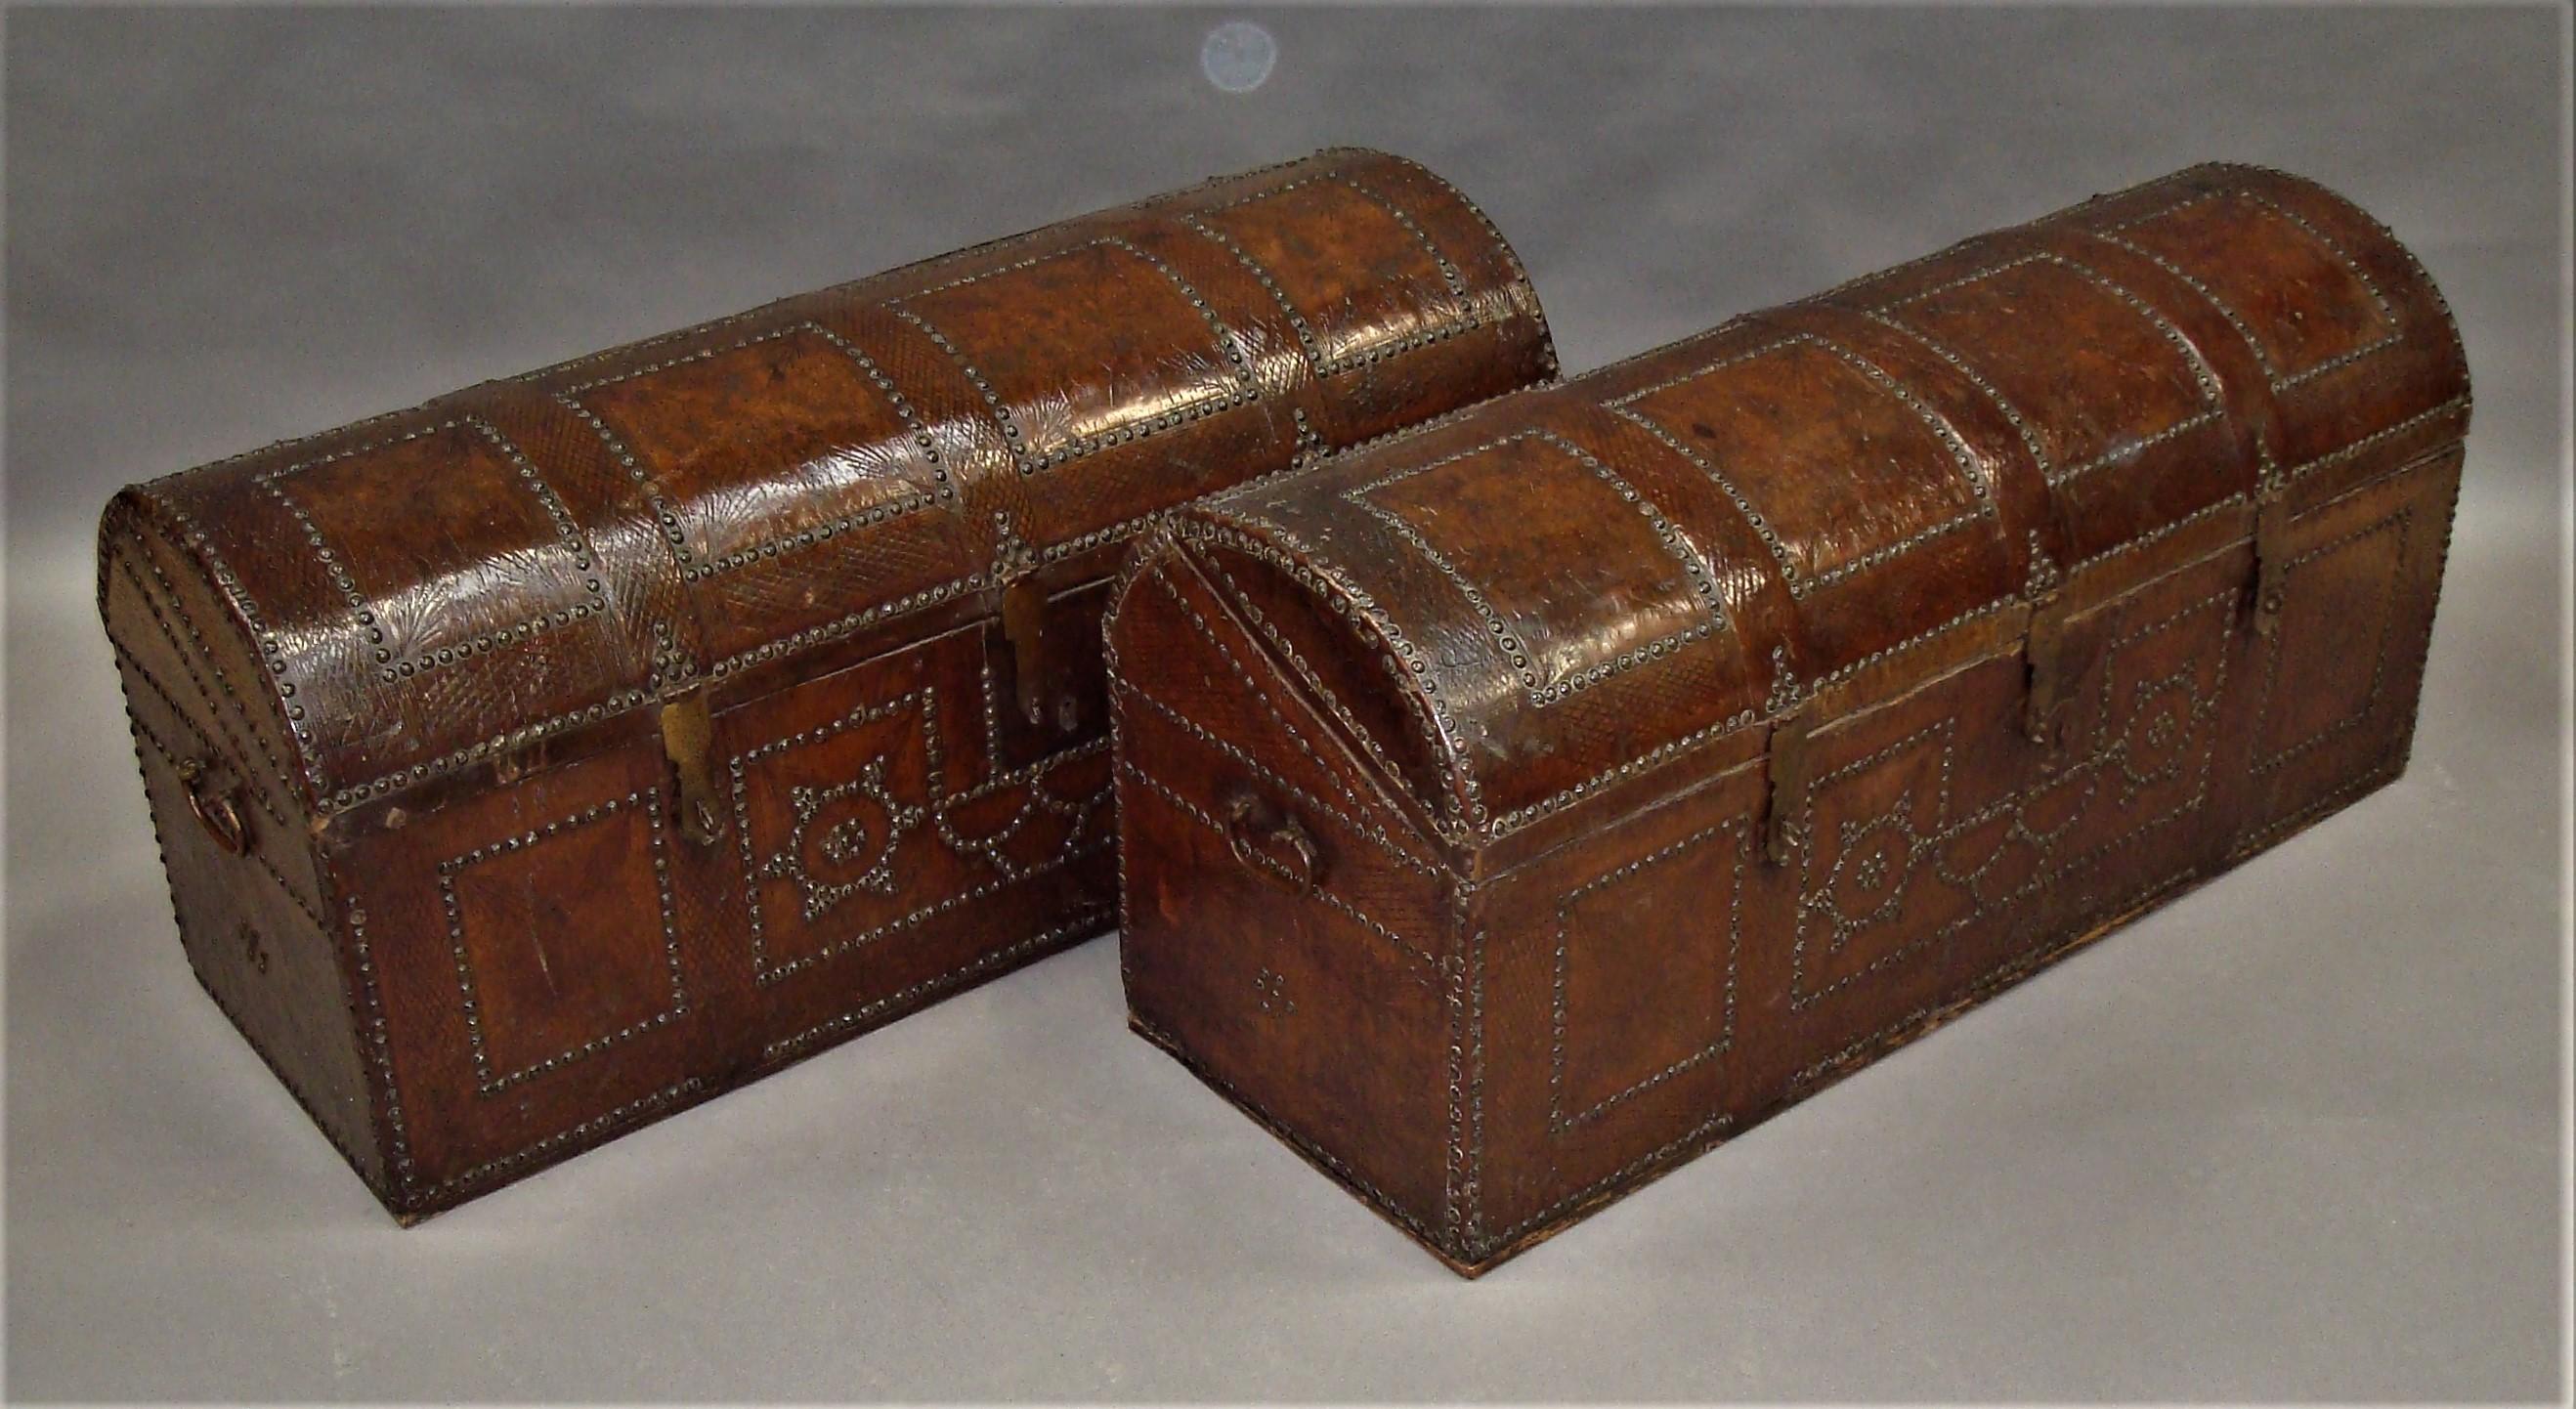 A rare 18th century pair of Spanish leather chest travelling trunks, in original tan brown leather with tooled decoration. The dome topped lids with four brass studded panels and three iron hasps to the front. The front with a geometric brass